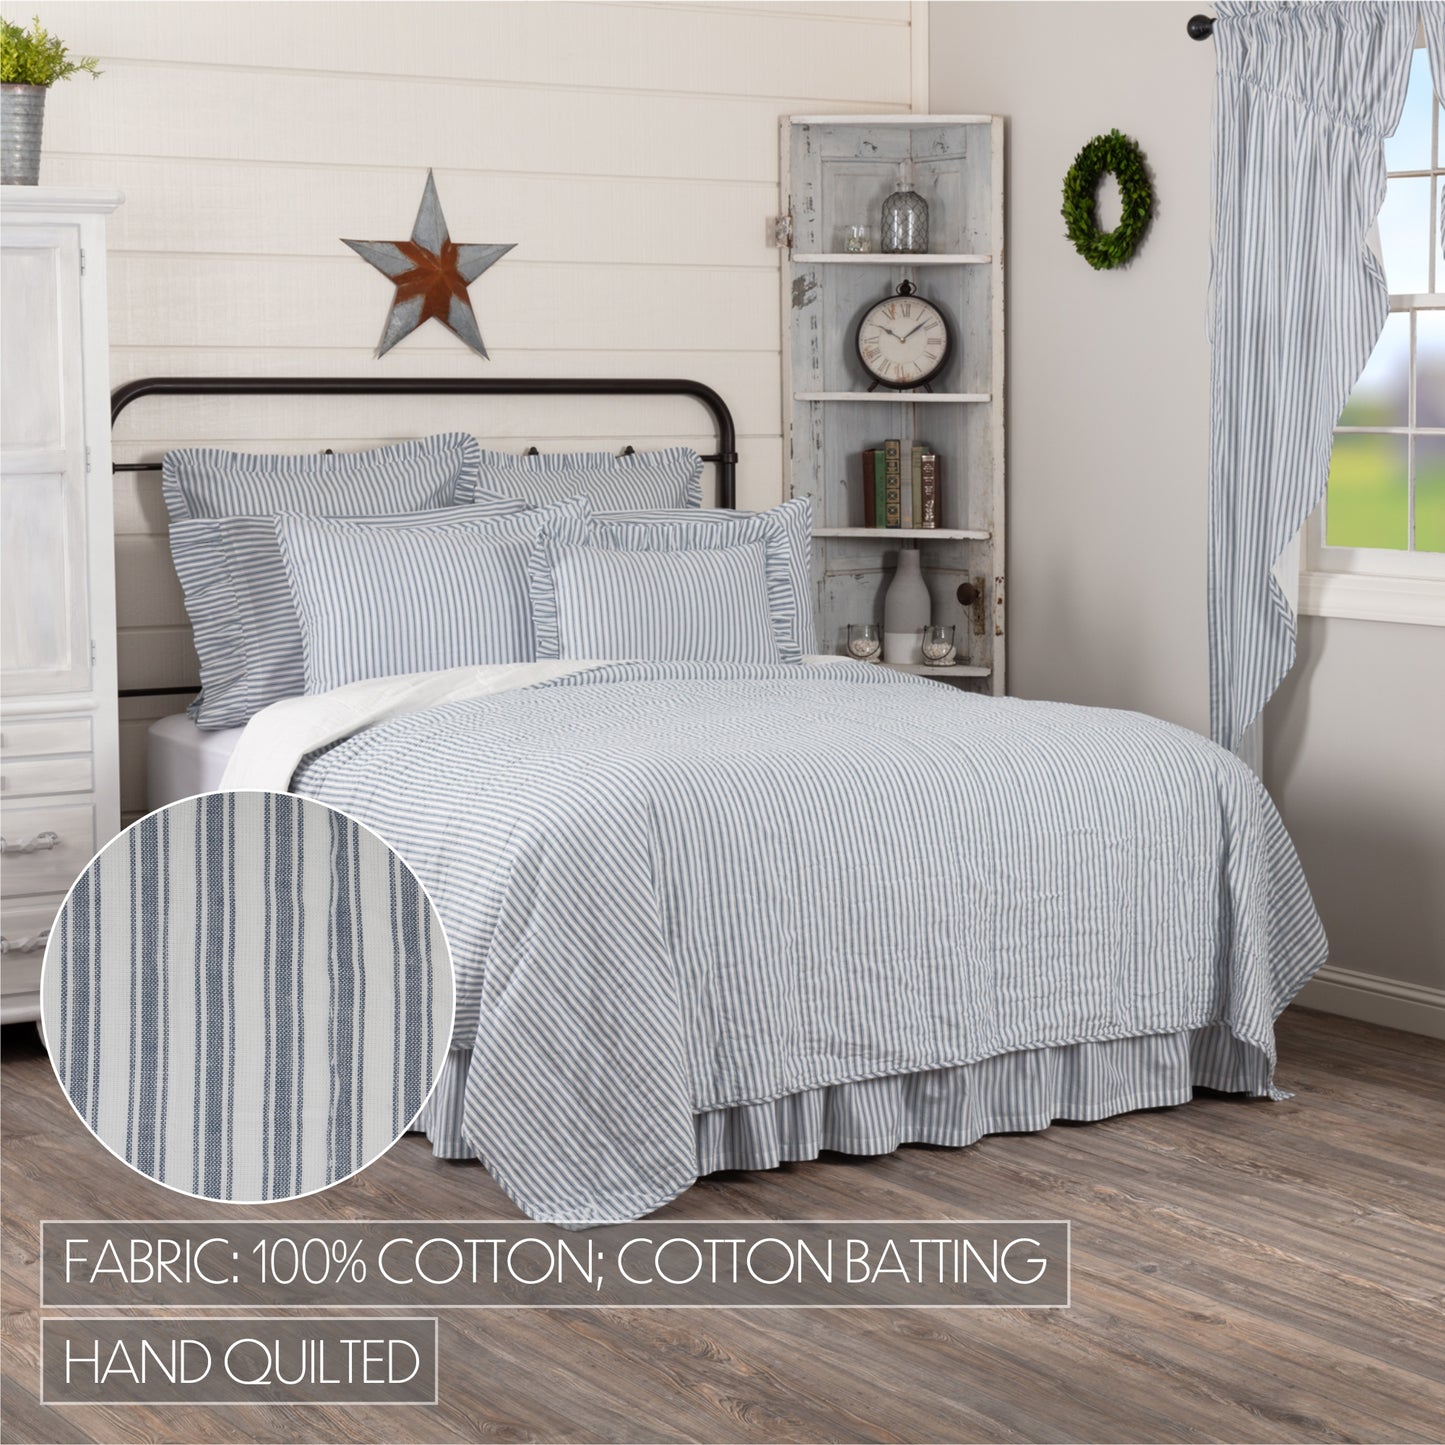 51904-Sawyer-Mill-Blue-Ticking-Stripe-Twin-Quilt-Coverlet-68Wx86L-image-1